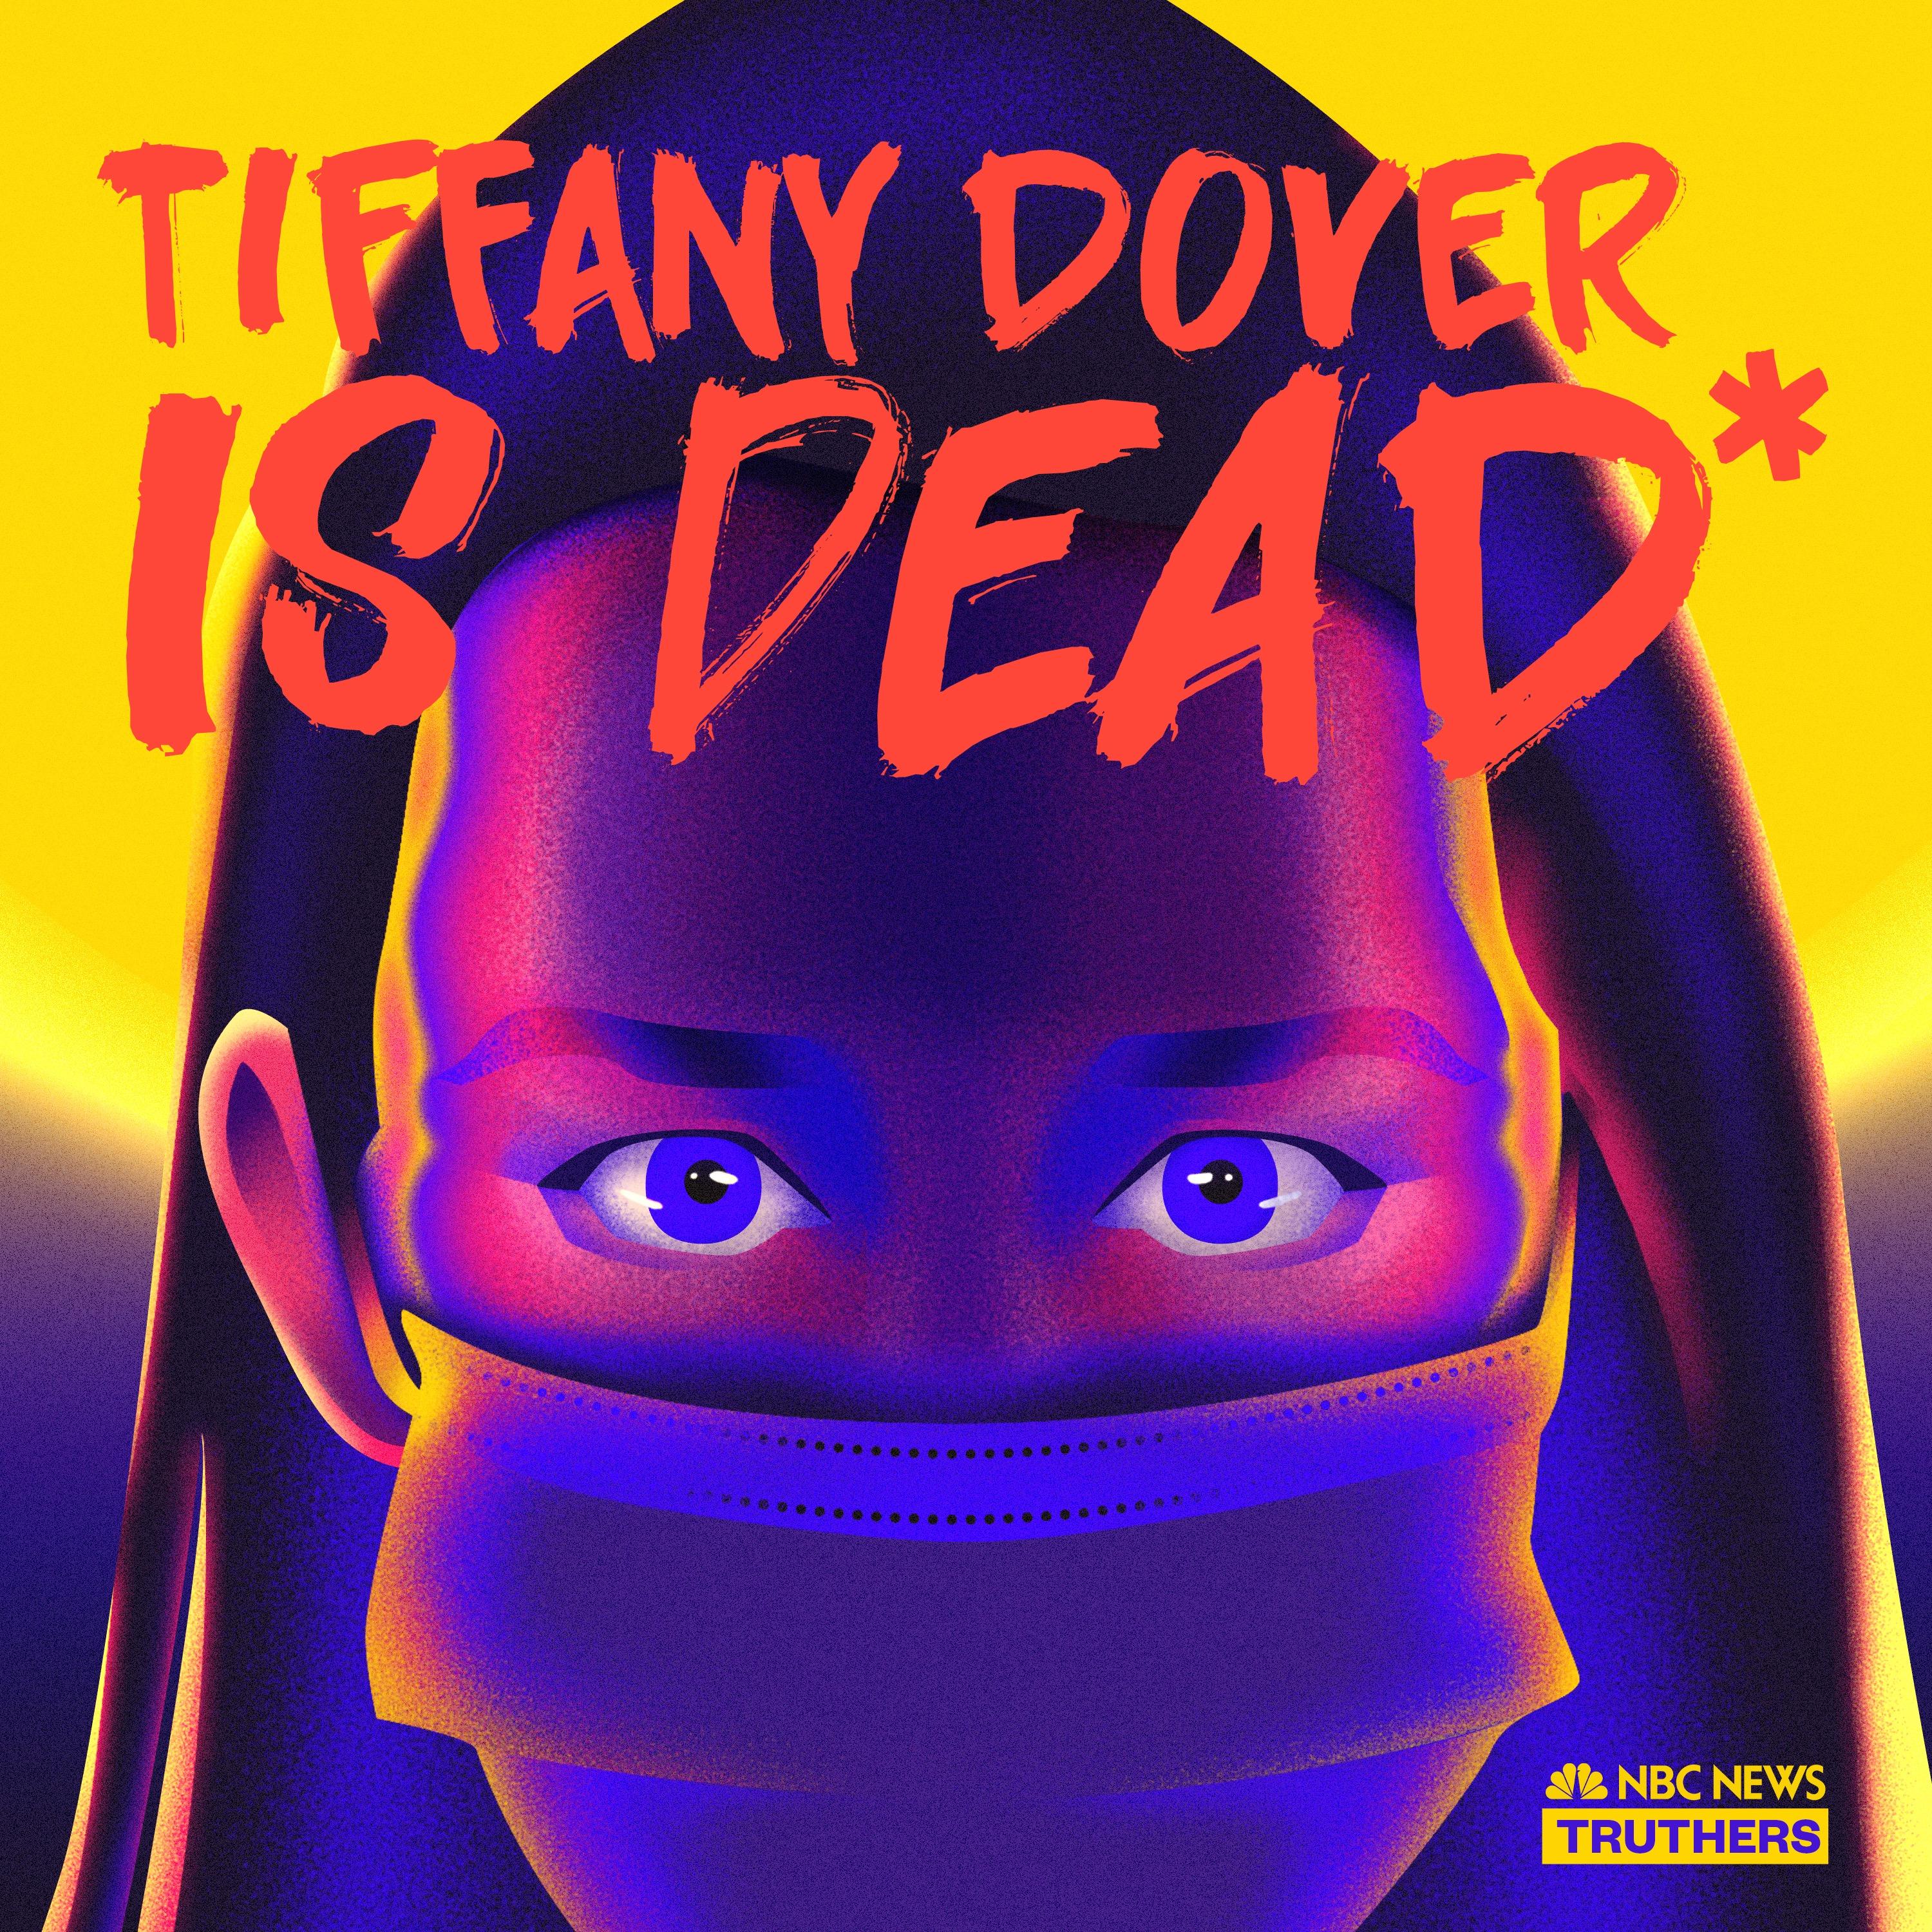 Show poster of Truthers: Tiffany Dover Is Dead*